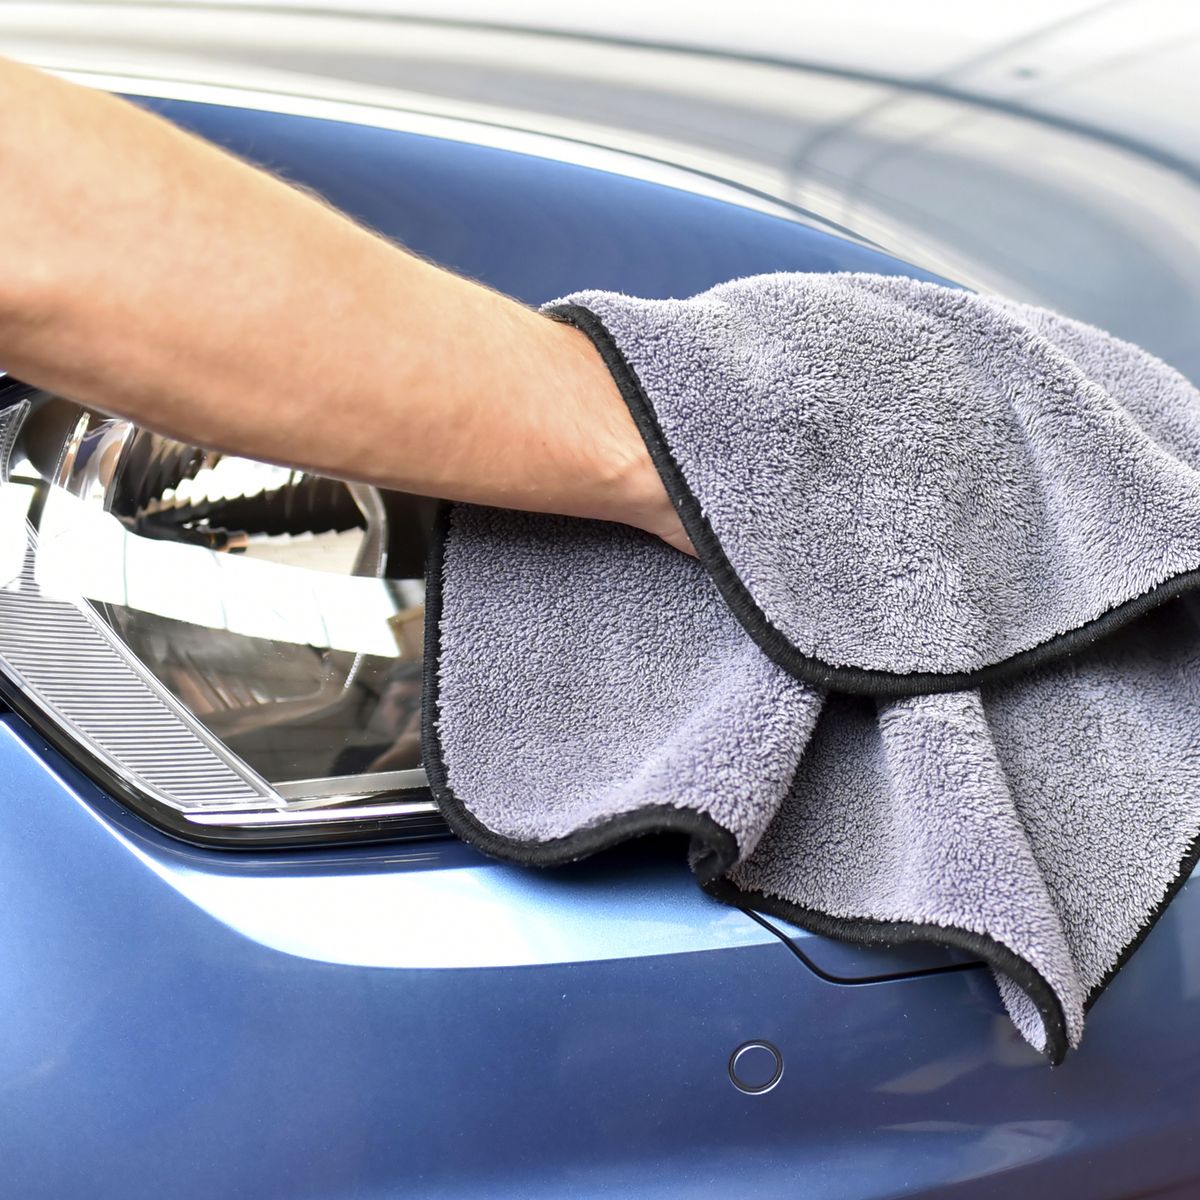 Wo-Wo on X: Are you running low on your car cleaning essentials